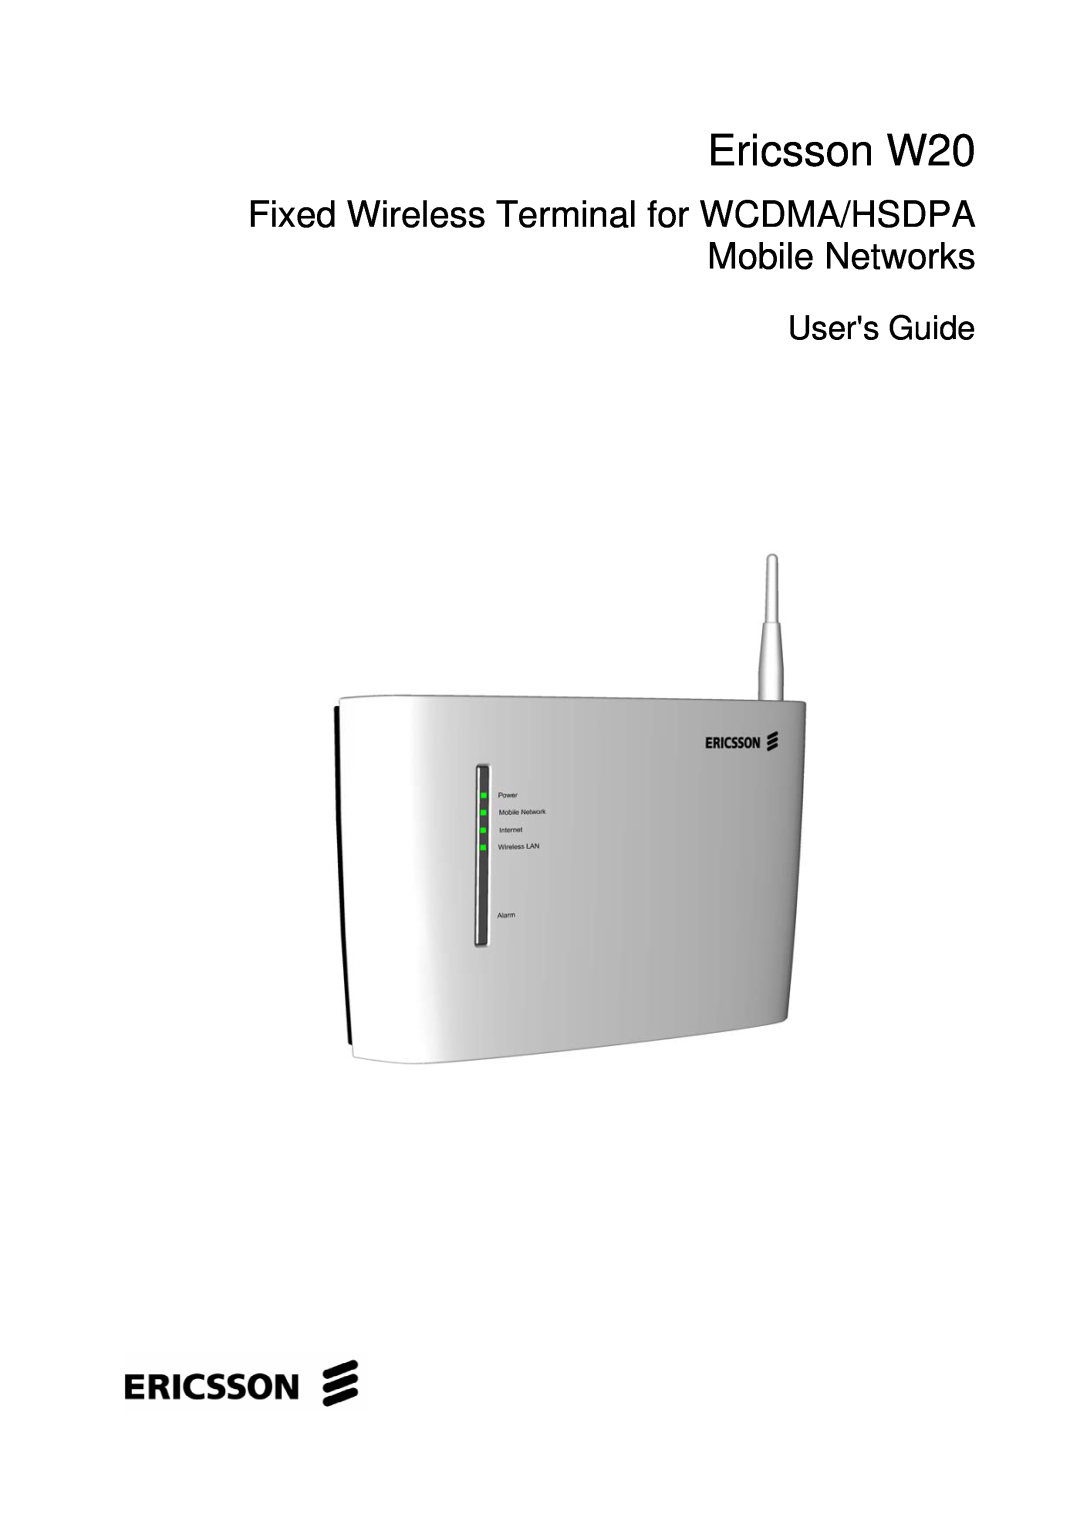 Ericsson manual Ericsson W20, Fixed Wireless Terminal for WCDMA/HSDPA Mobile Networks, Users Guide 